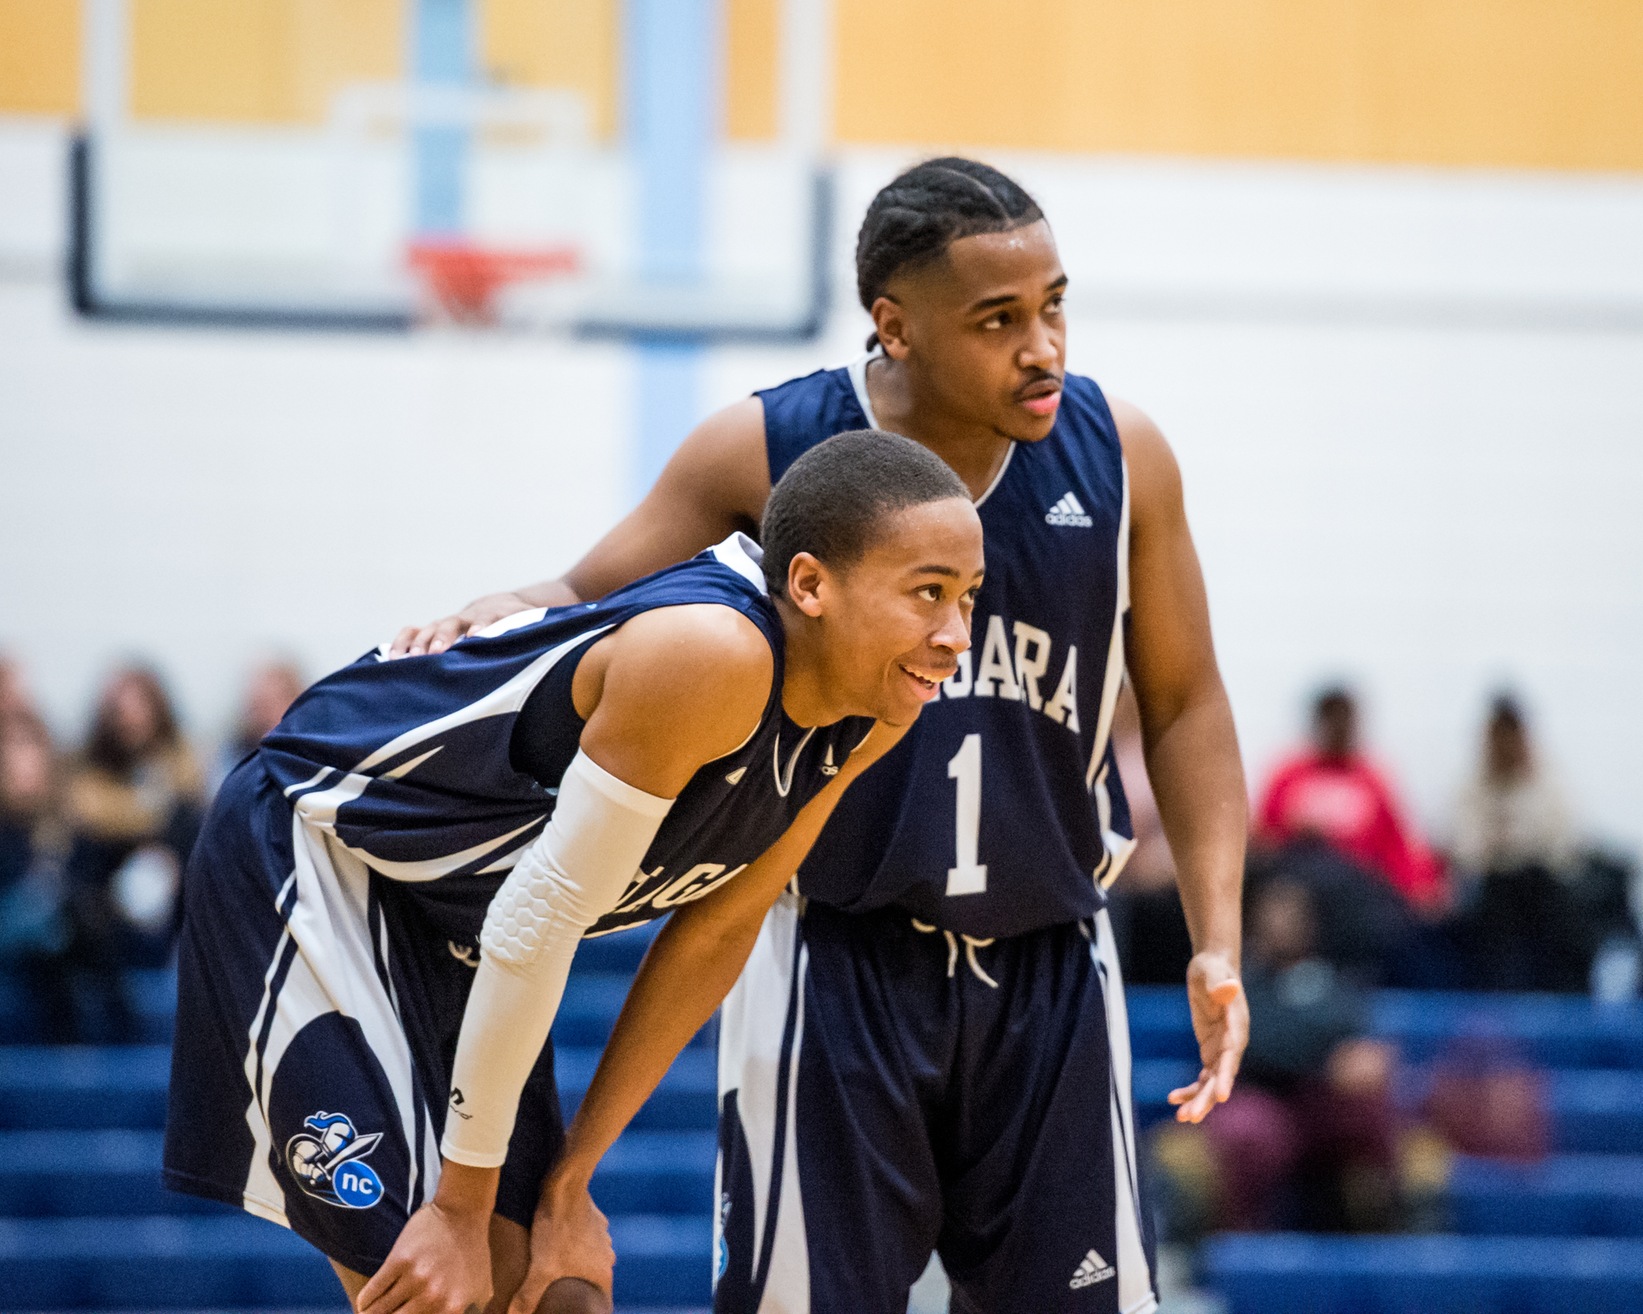 Men's basketball set to host Loyalist in OCAA crossover game